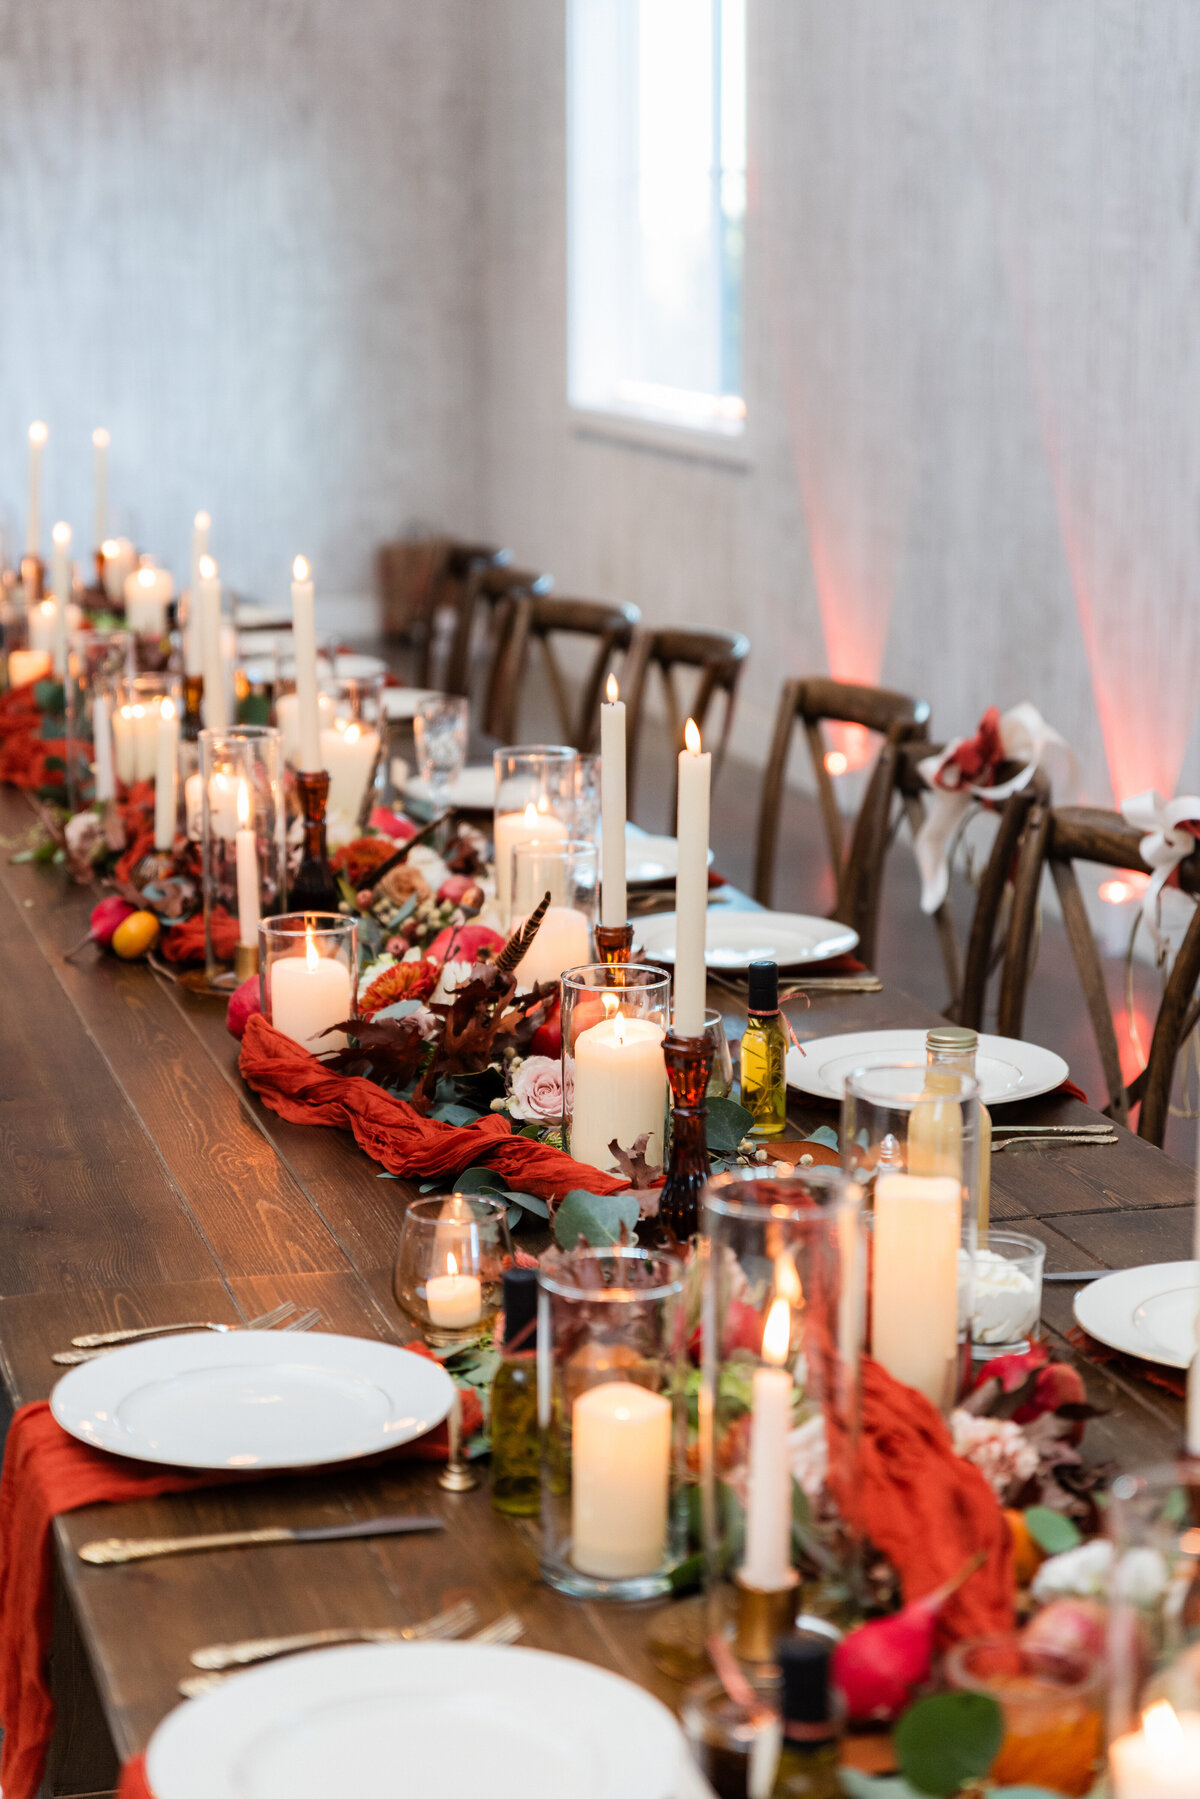 A table scape features various candles, a red tulle runner and warm colored florals.